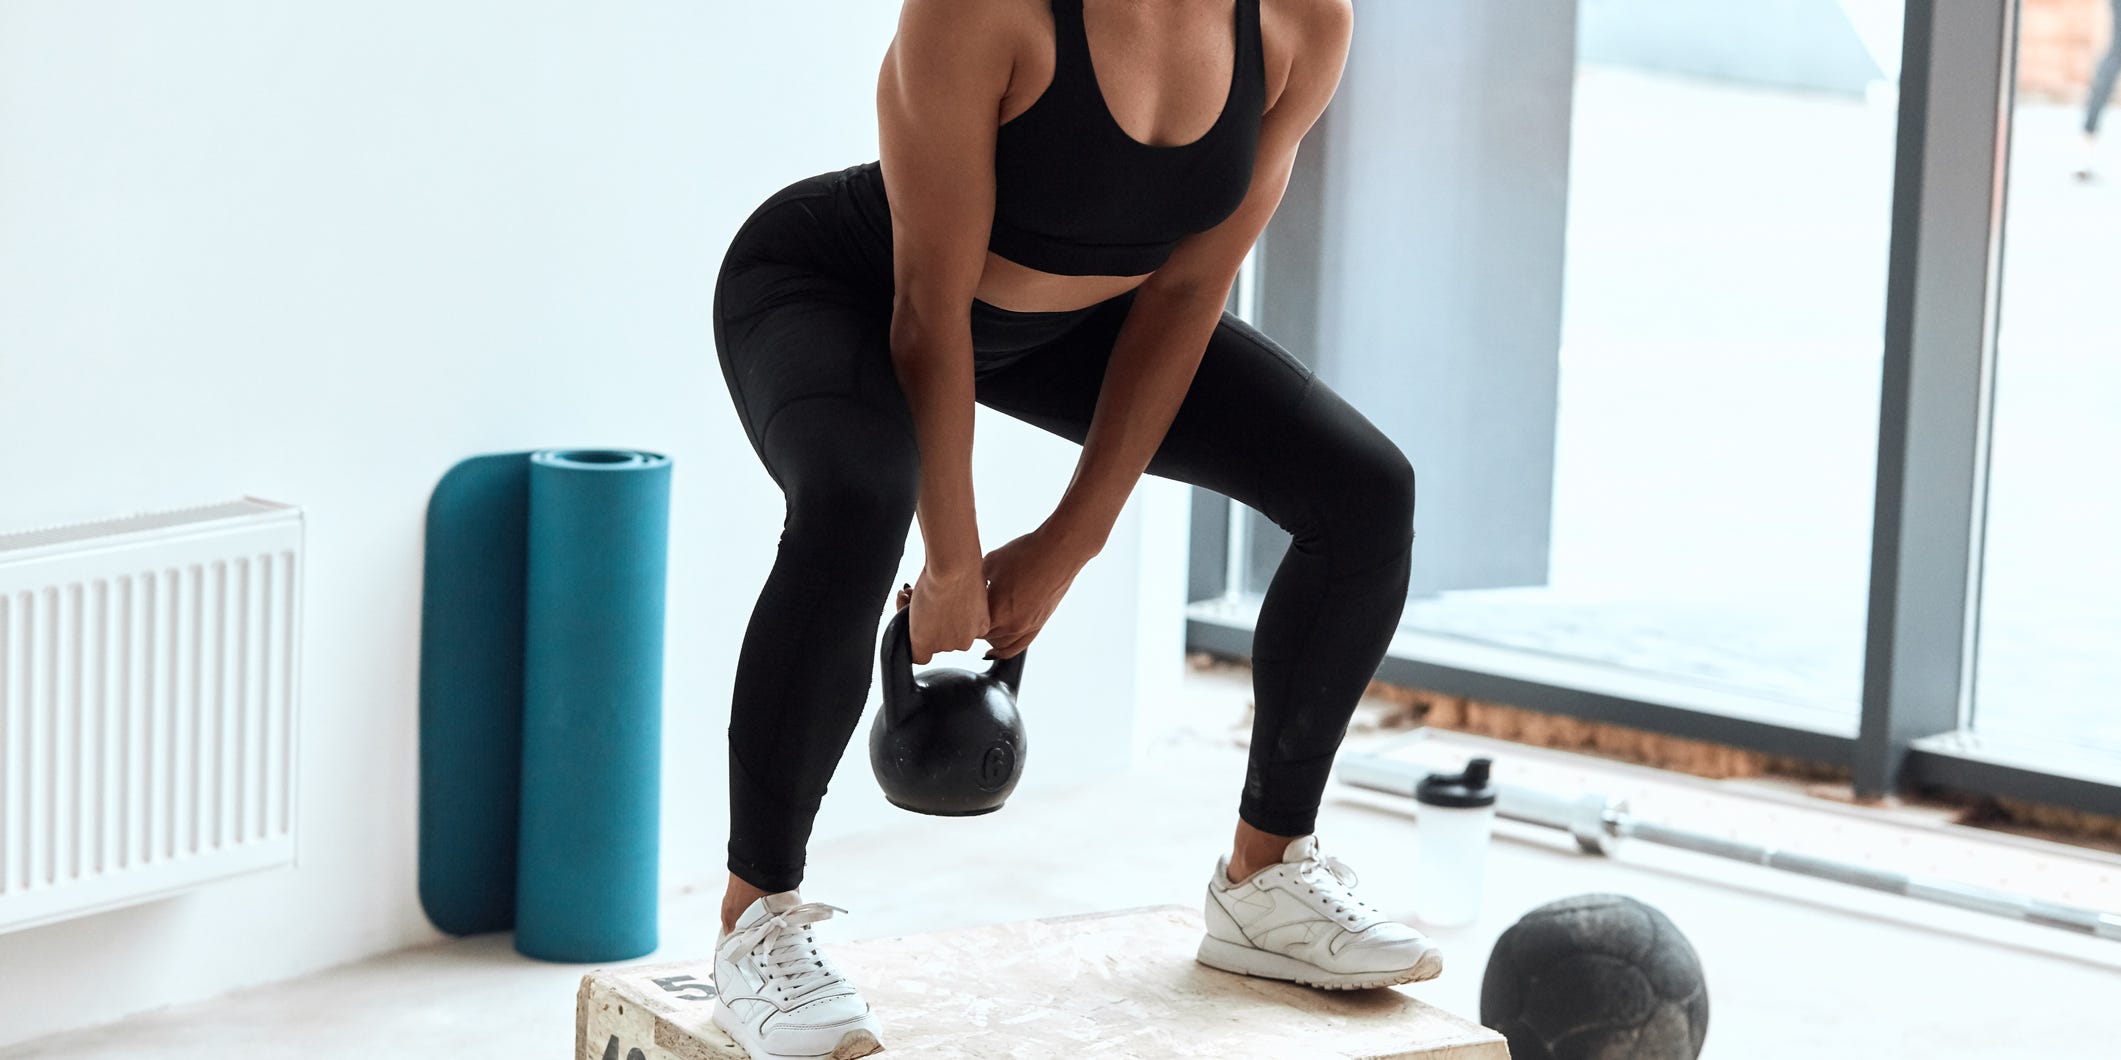 A woman in workout attire performs a kettle bell swing.